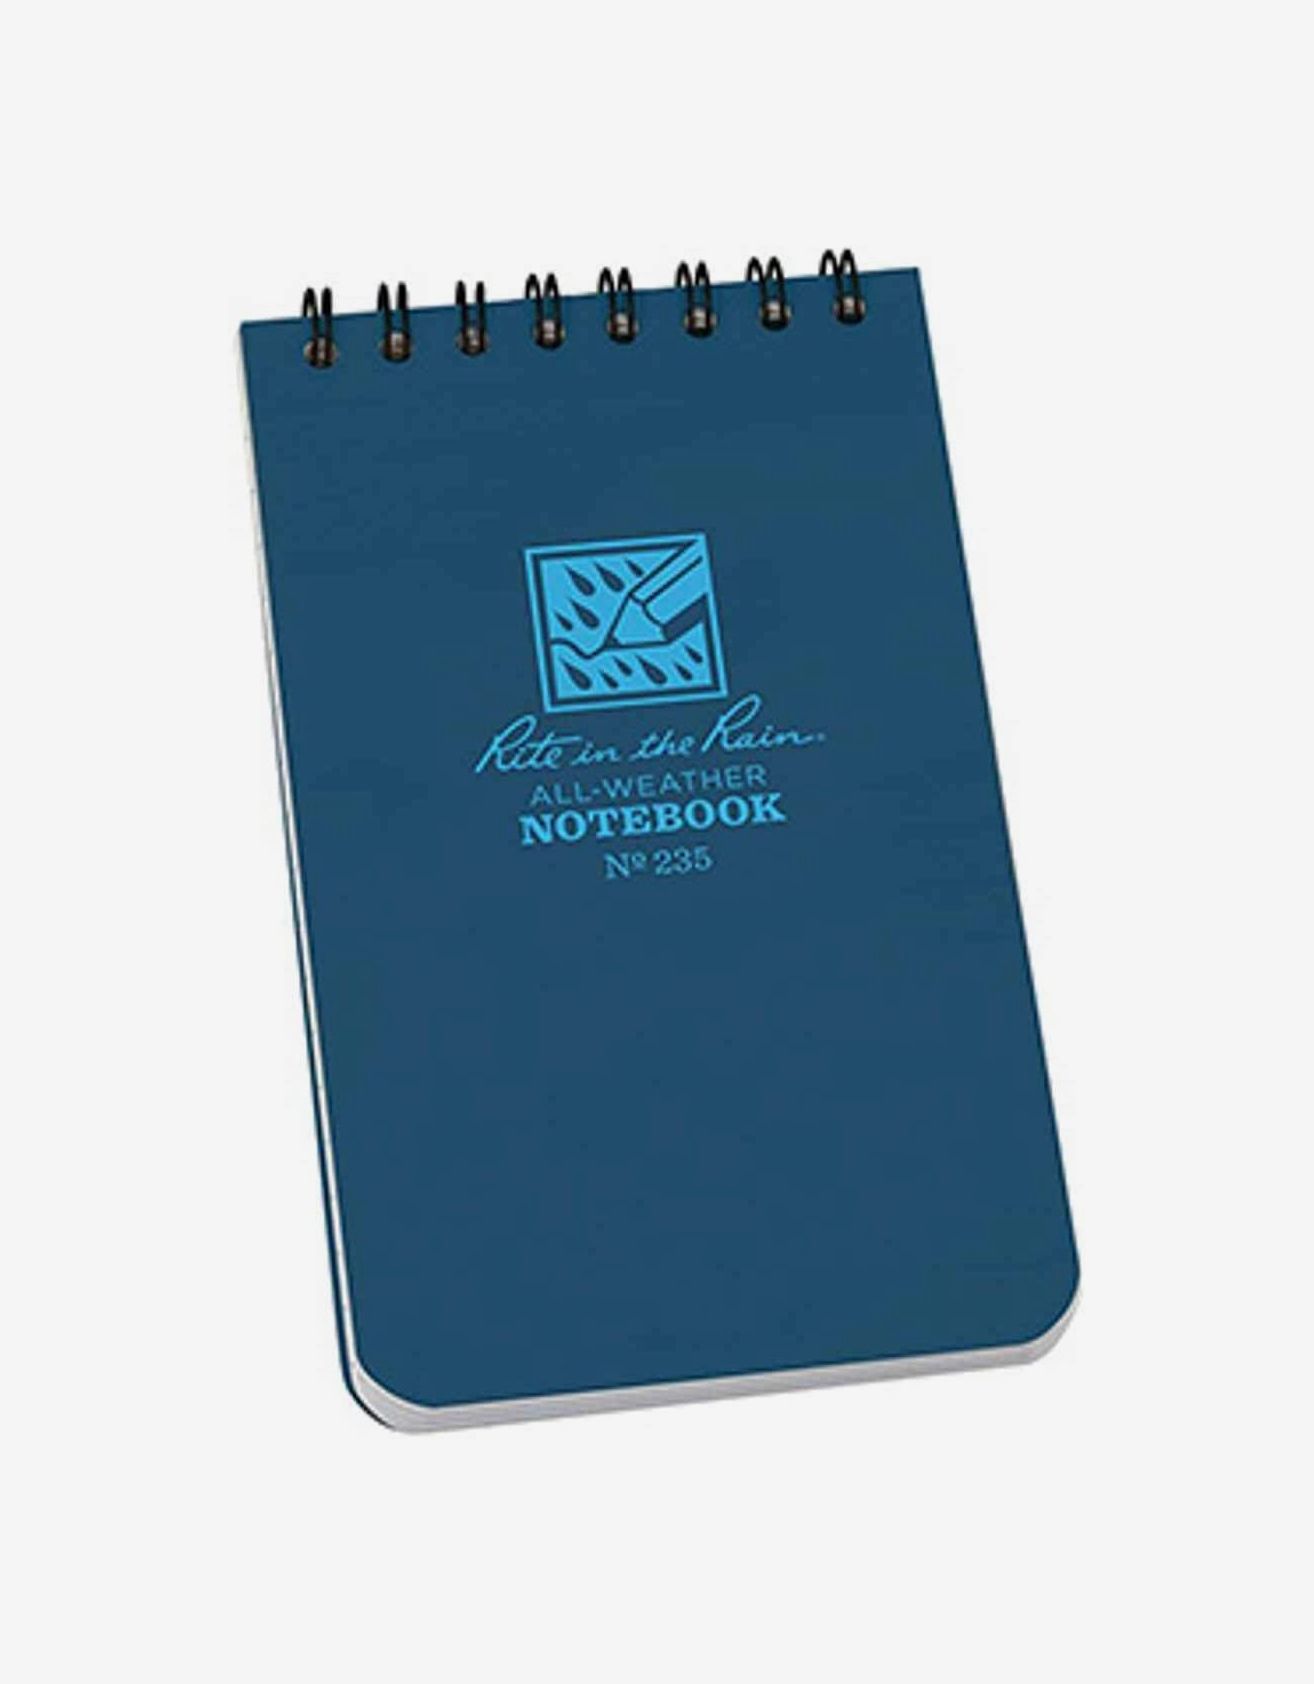 Notebooks with Cover, Color and Size Alternatives